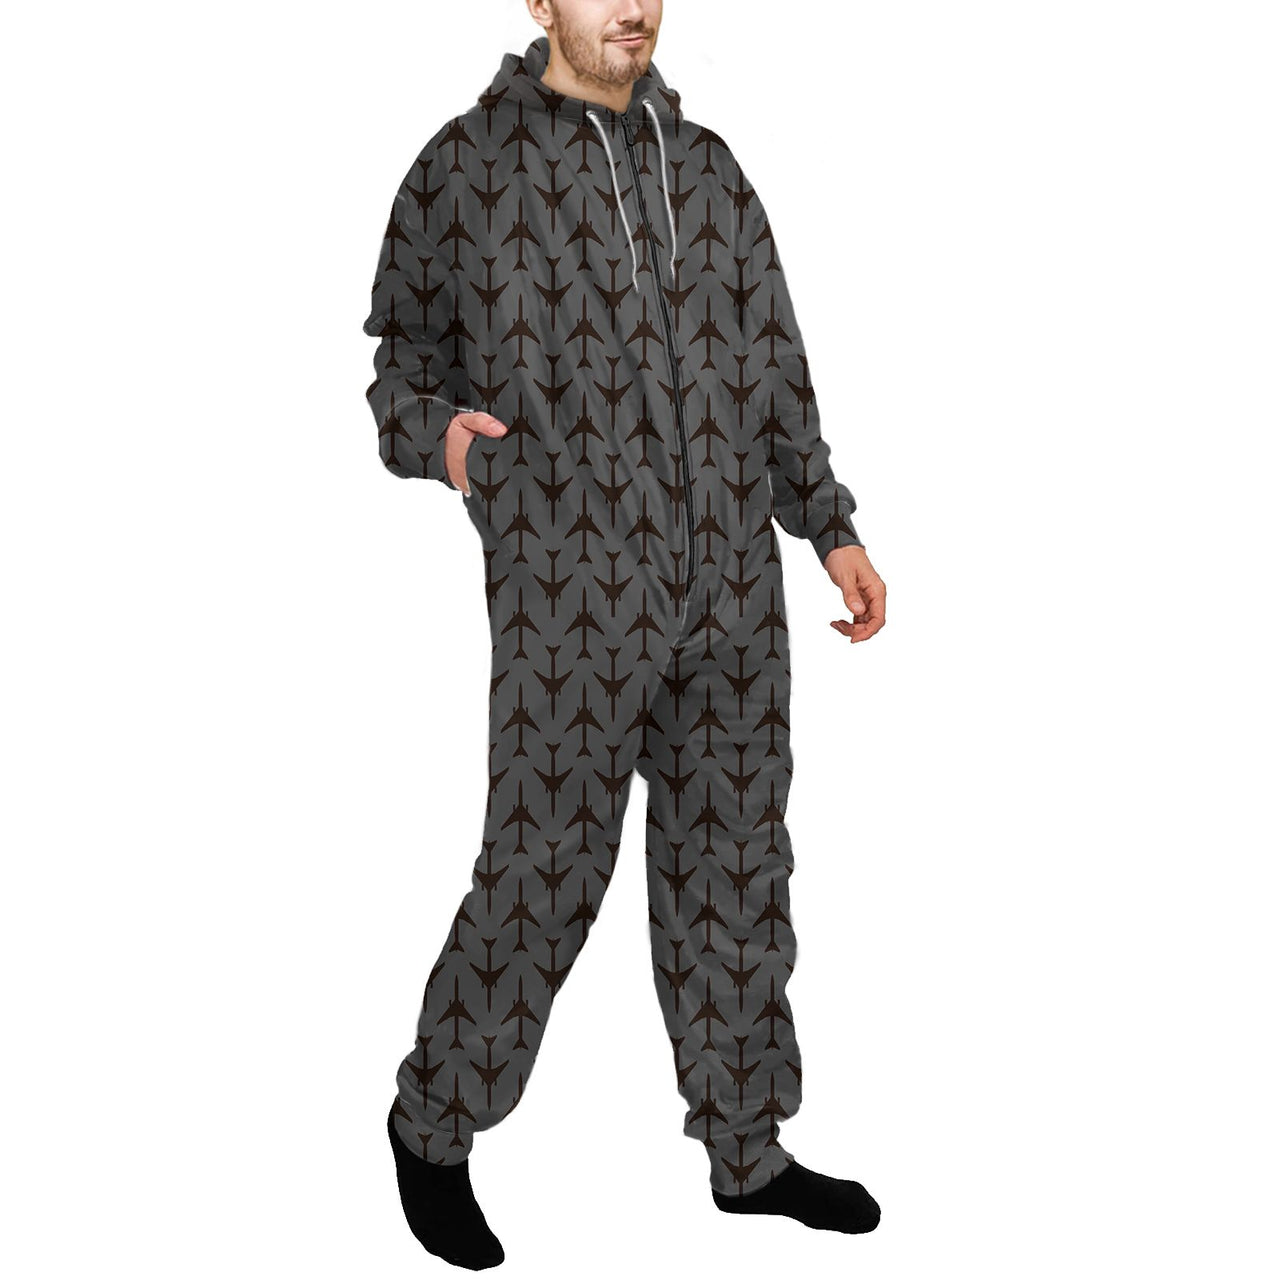 Perfectly Sized Seamless Airplanes Gray Designed Jumpsuit for Men & Women